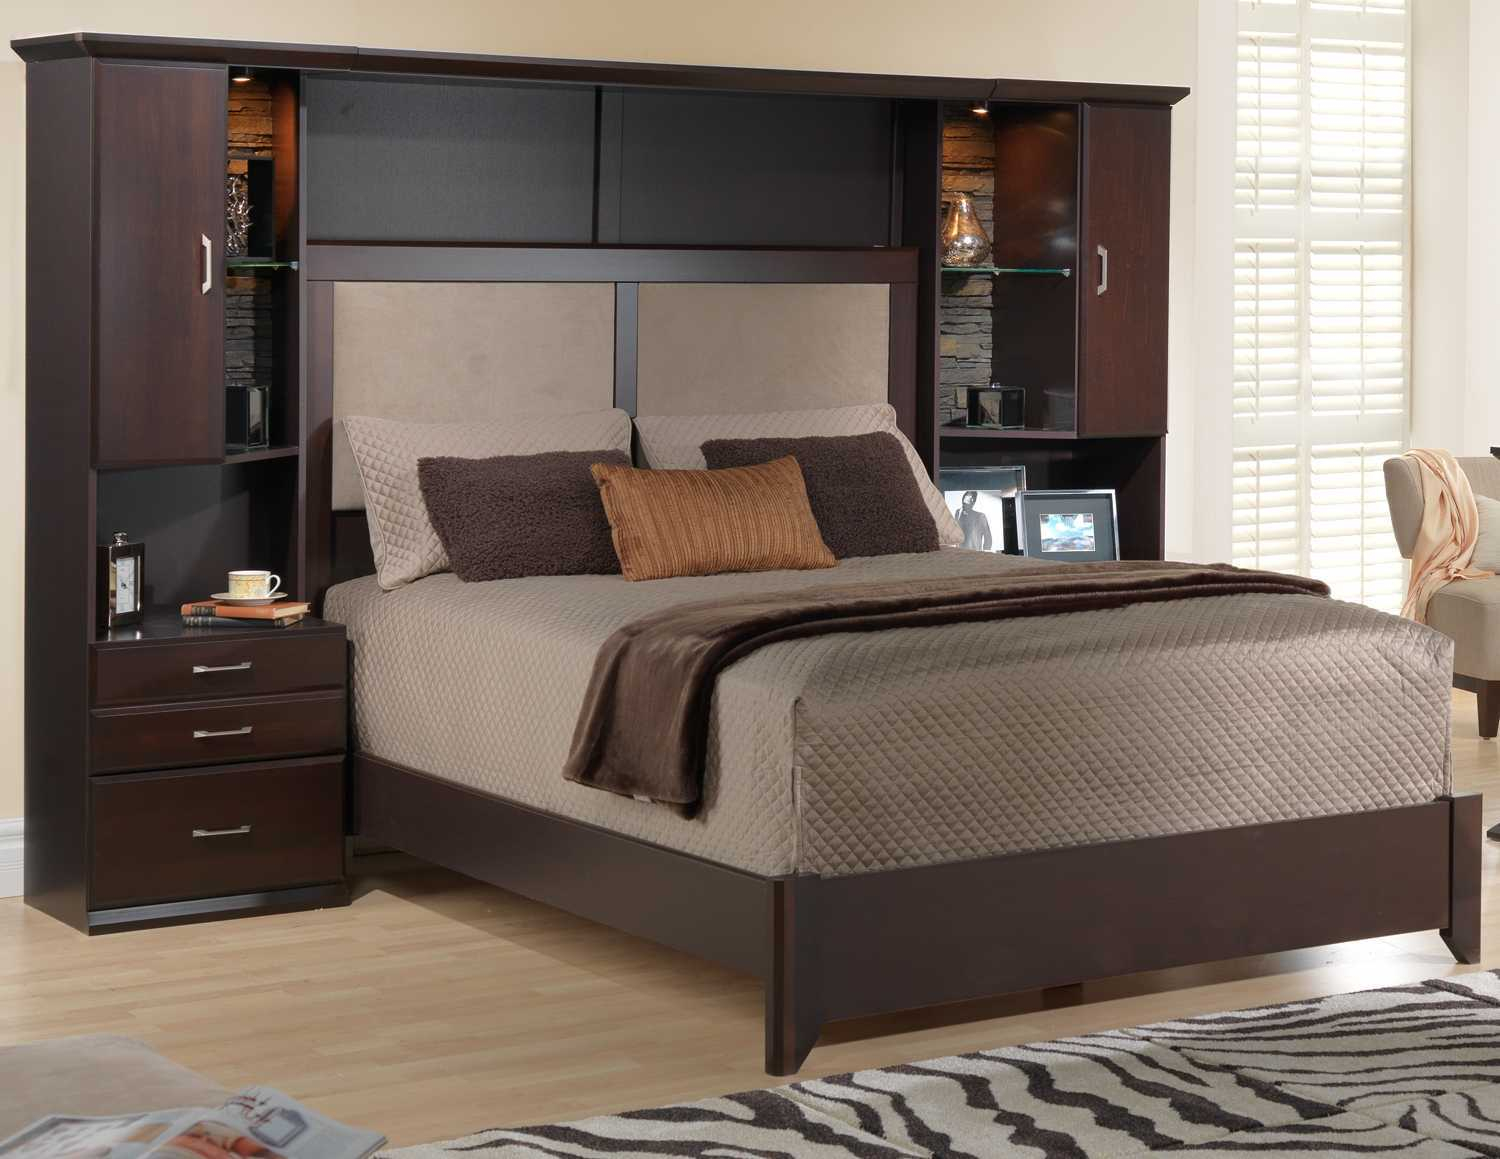 Incredible Wall Unit Bedroom Set Furniture Storage Suite Closet Idea for proportions 1500 X 1159